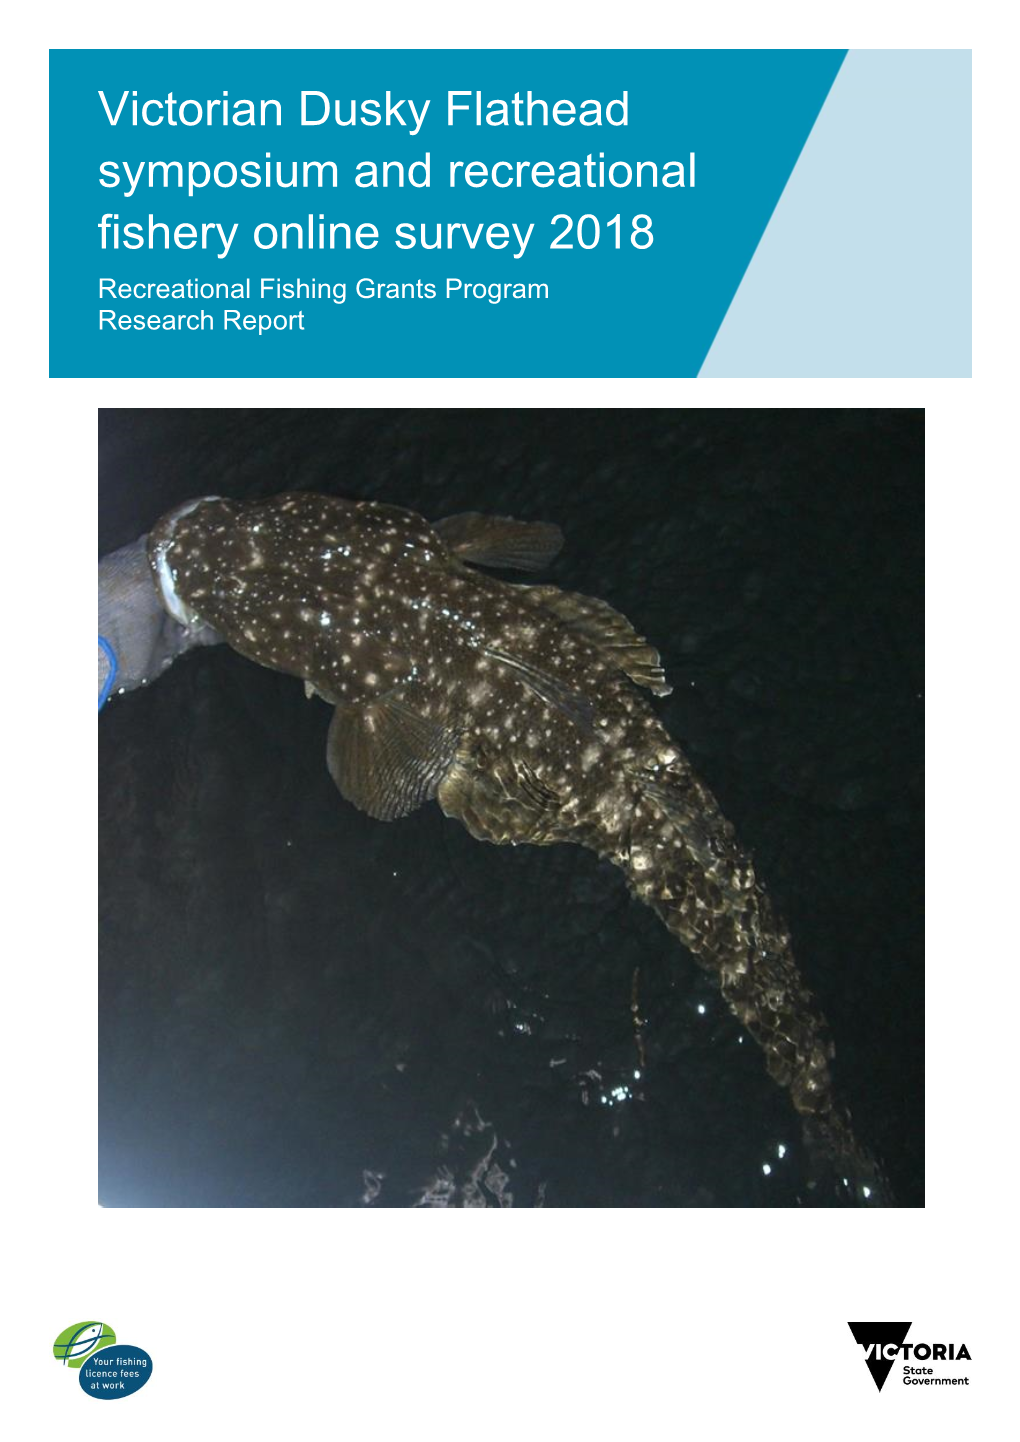 Victorian Dusky Flathead Symposium and Recreational Fishery Online Survey 2018 Recreational Fishing Grants Program Research Report